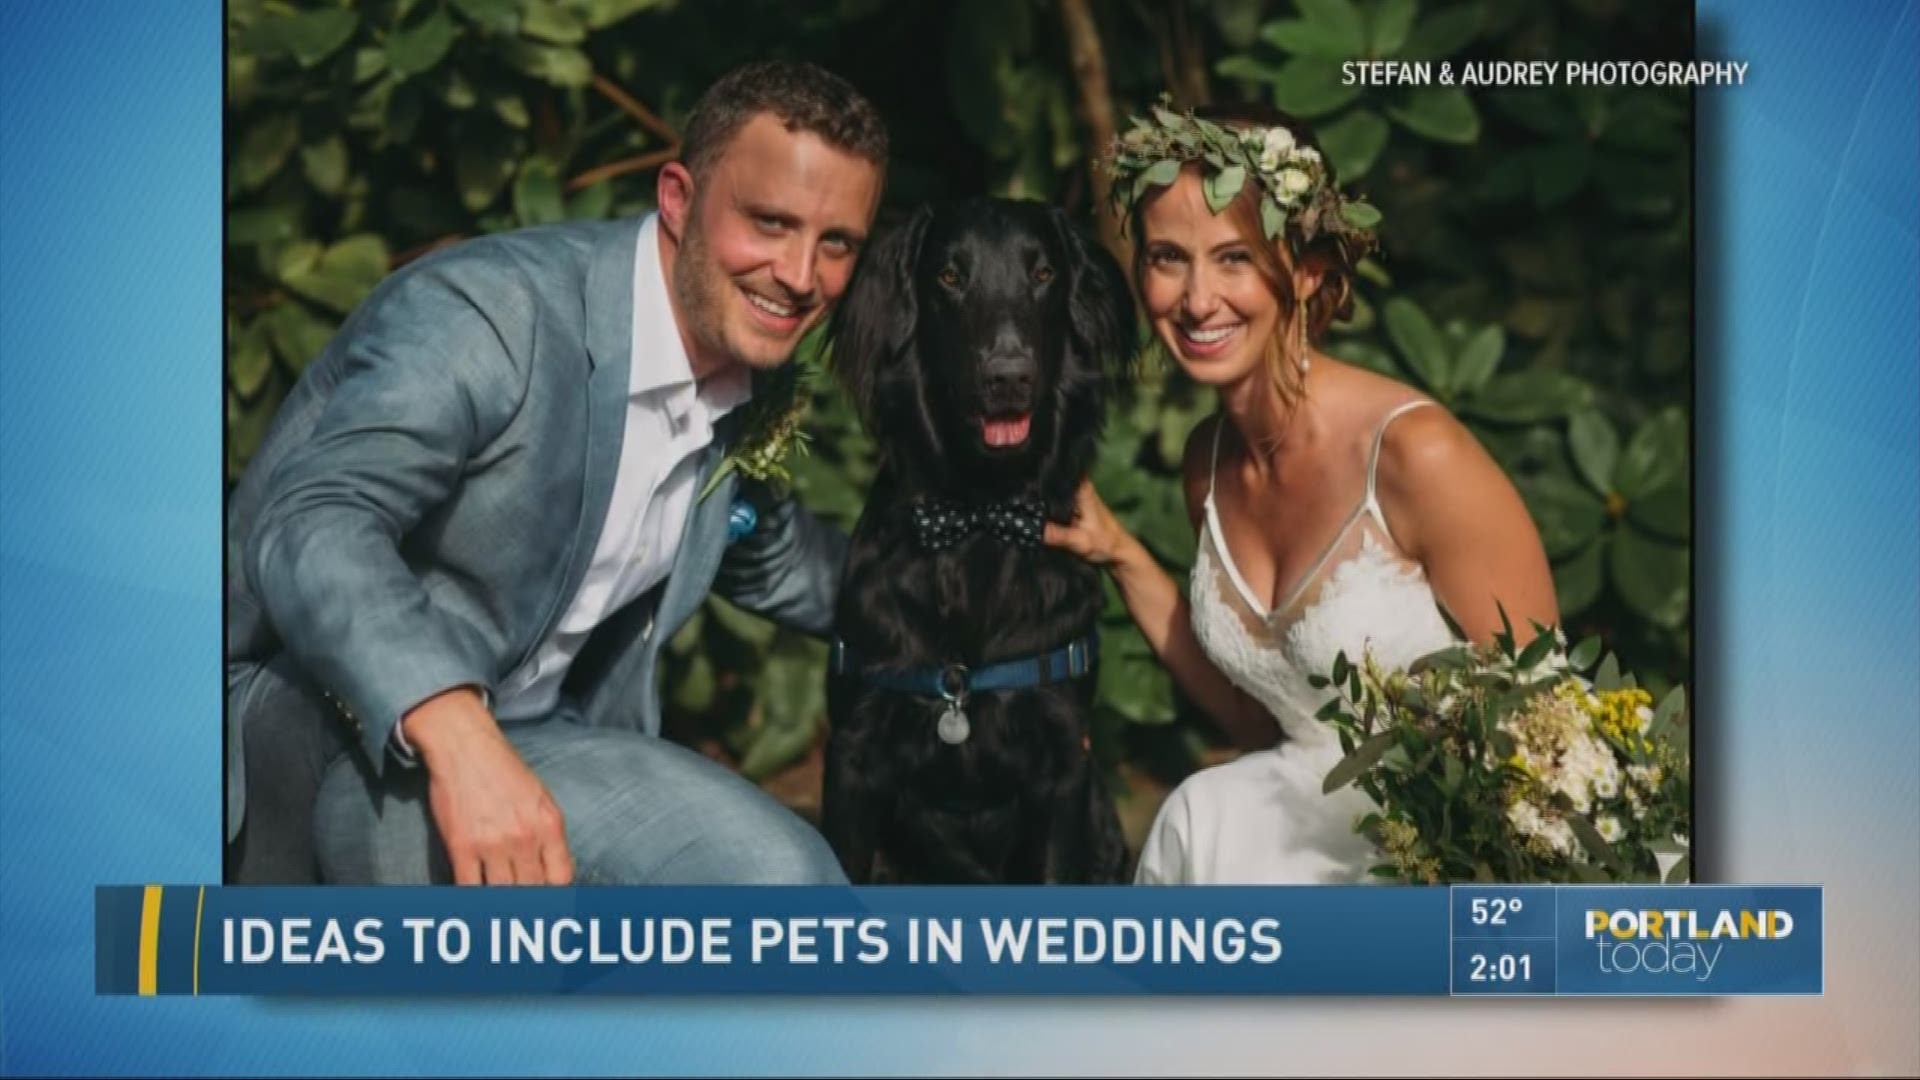 Ideas to include pets in weddings